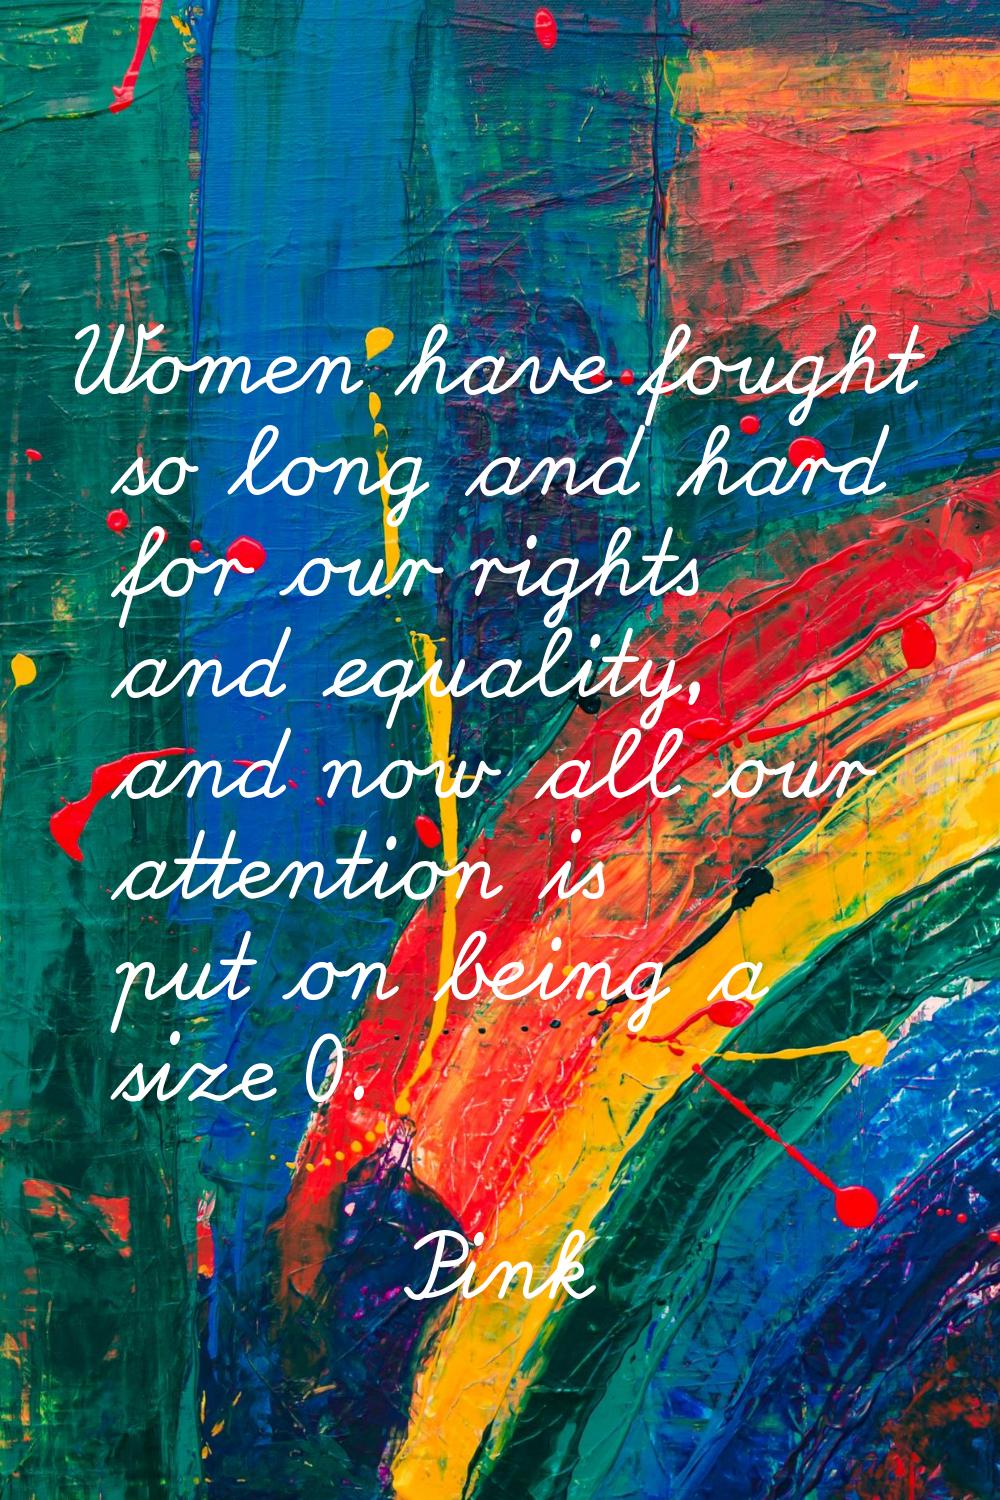 Women have fought so long and hard for our rights and equality, and now all our attention is put on